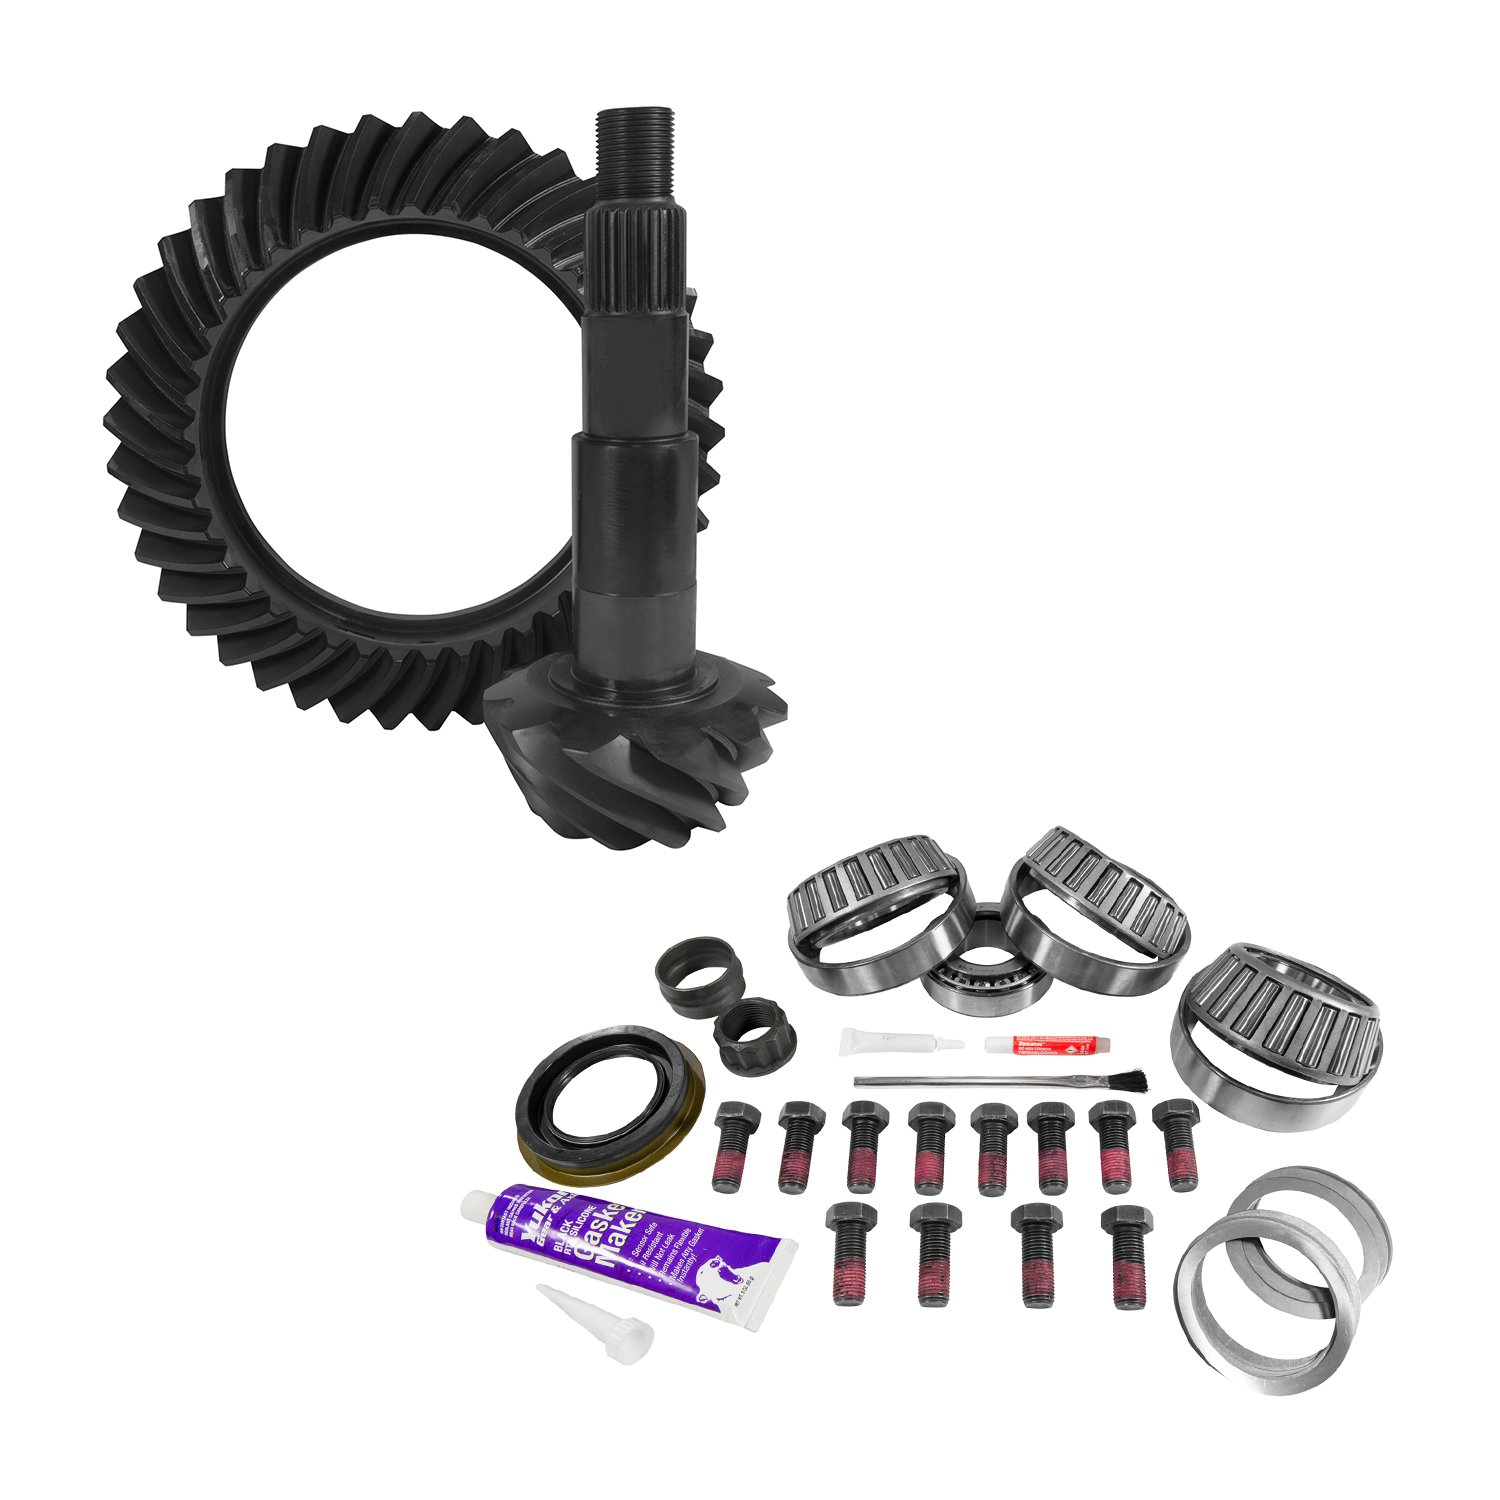 USA Standard 10826 11.5 in. Aam 4.11 Rear Ring & Pinion Install Kit, 4.375 in. Od Pinion Bearing